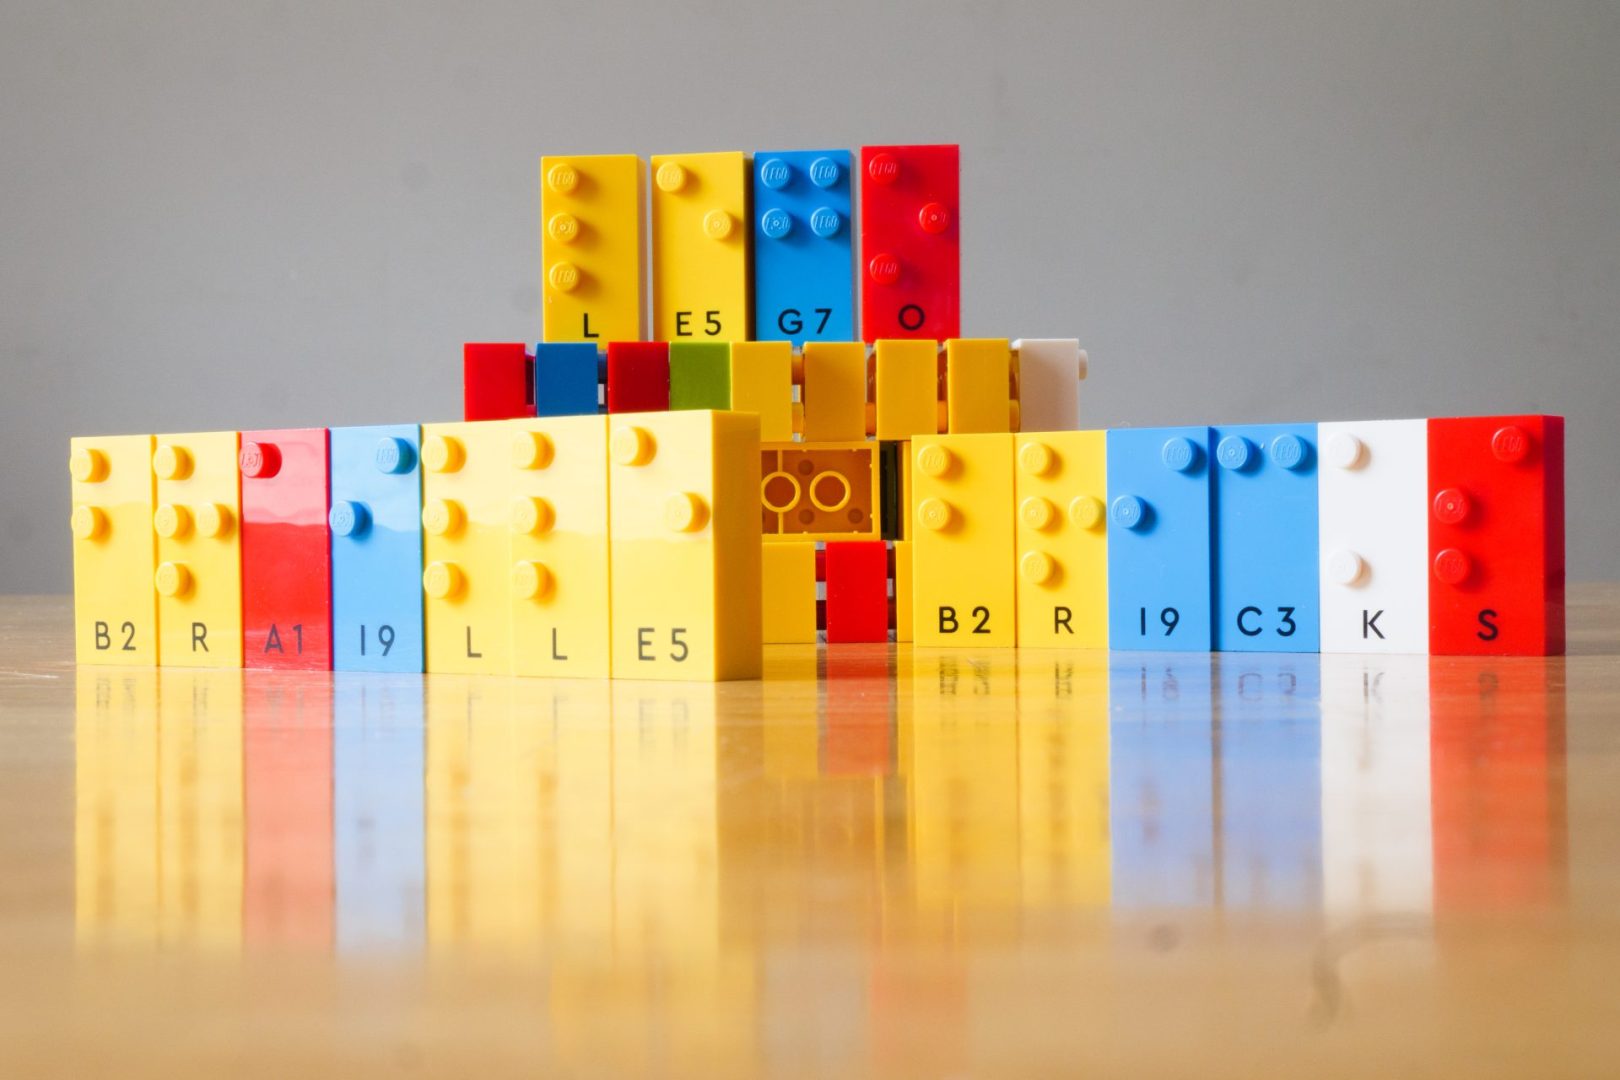 LEGO Braille Bricks standing up on a table. They are in a variety of primary colors and feature studs in a variety of braille cell configurations. Some of the bricks are lined up to spell "lego braille bricks"